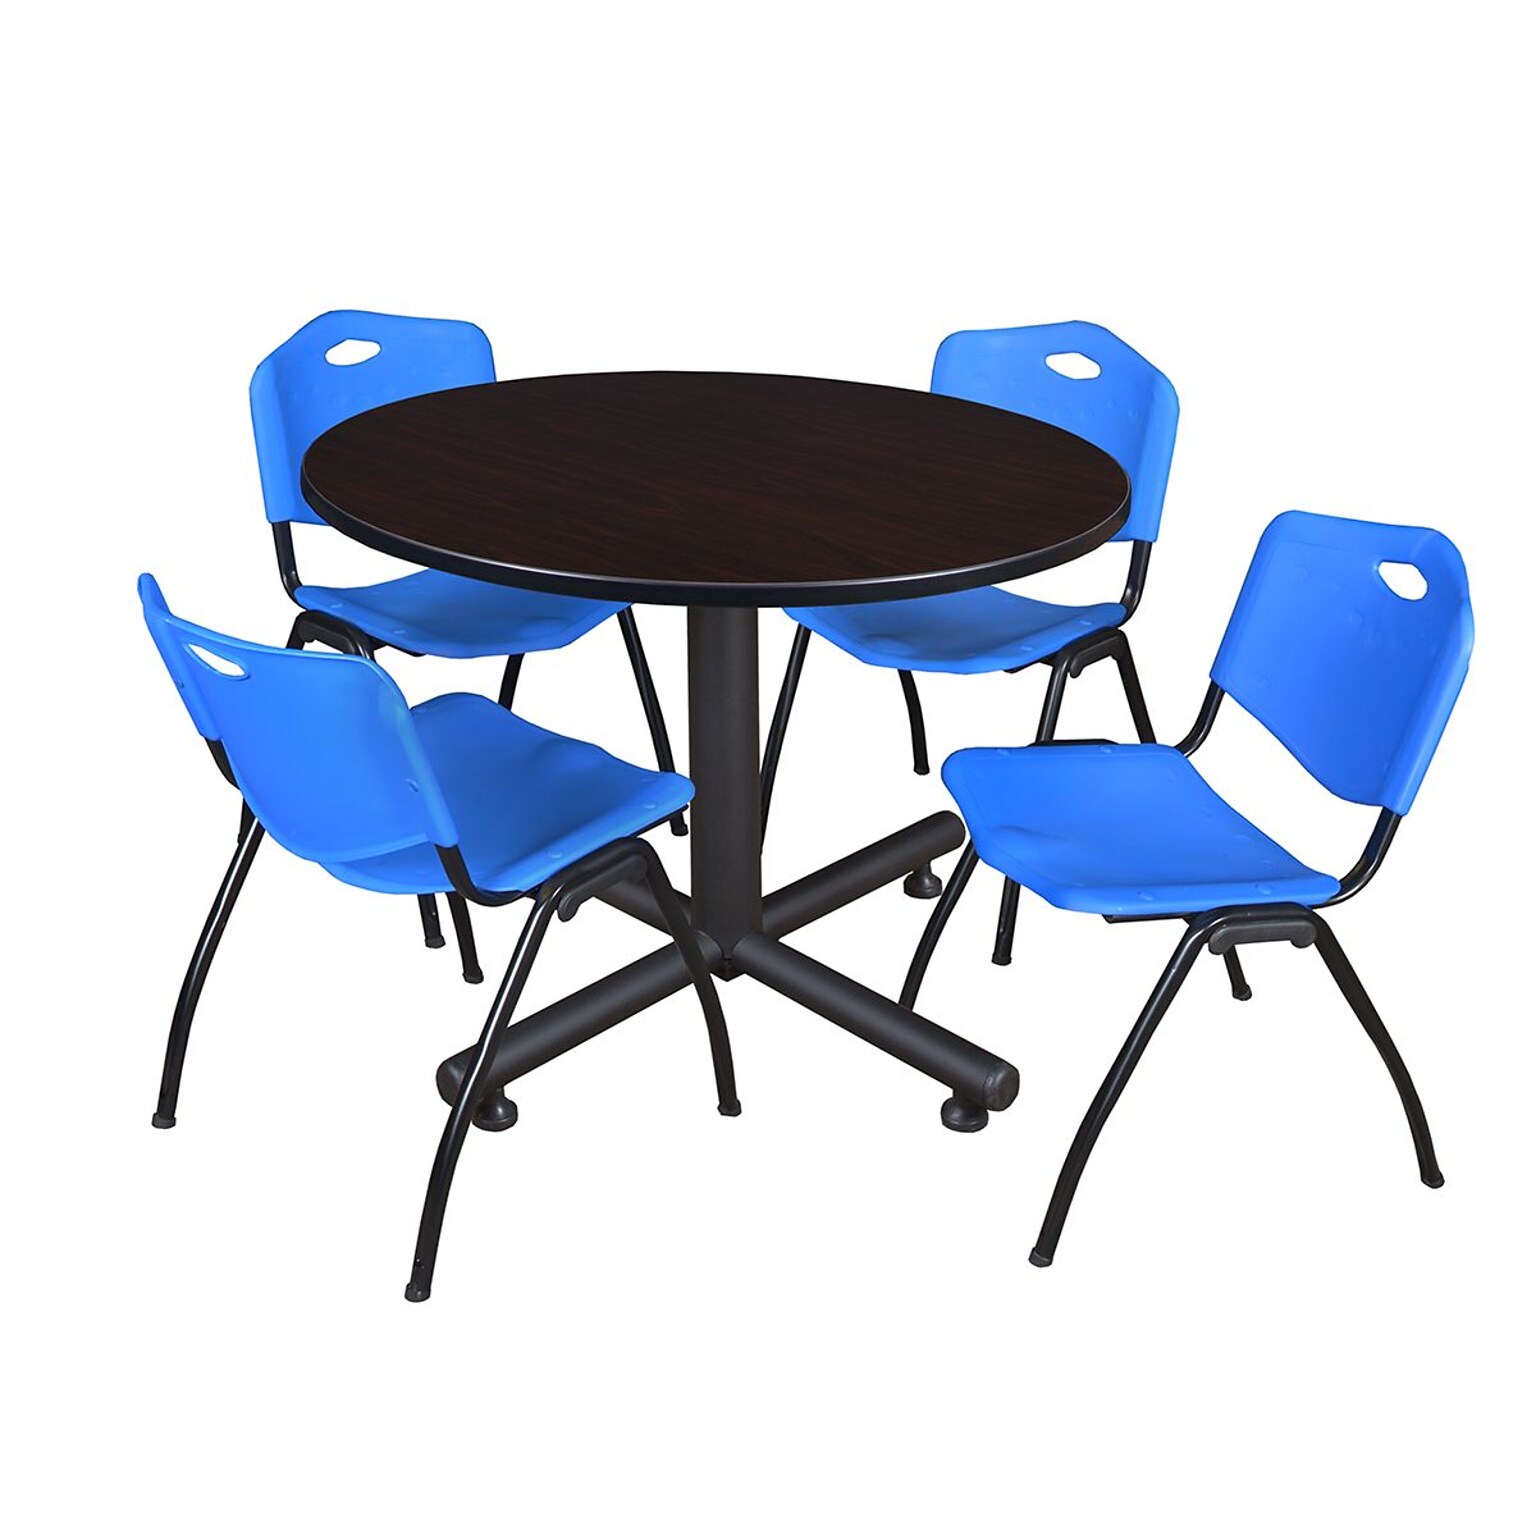 Regency 48-inch Round Kobe Breakroom Table With 4 M Stacker Chairs, Blue (TKB48RNDMW47BE)